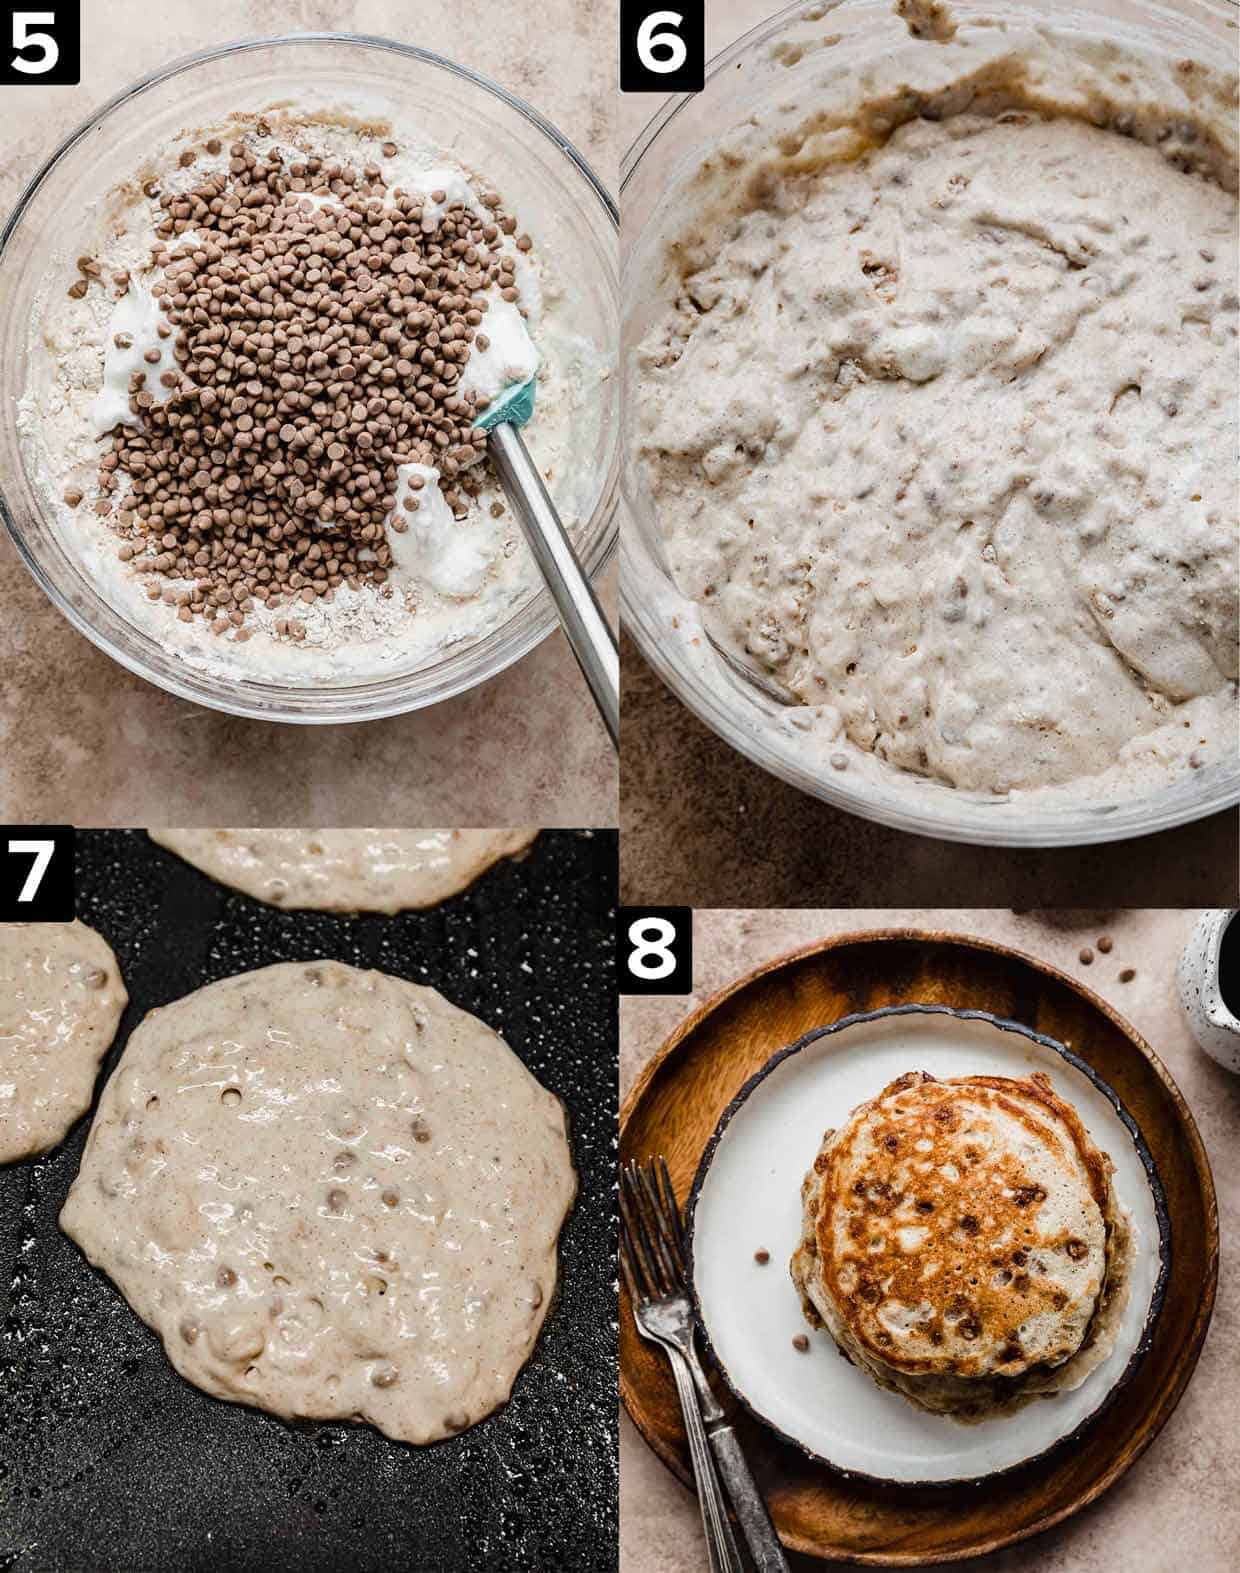 Four images, top left has mini cinnamon chips overtop a pancake batter, top right is Cinnamon Chip Pancake batter in glass bowl. Bottom right is a cinnamon pancake cooked on a black griddle, bottom right is a stack of Cinnamon Chip Pancakes on a white plate.